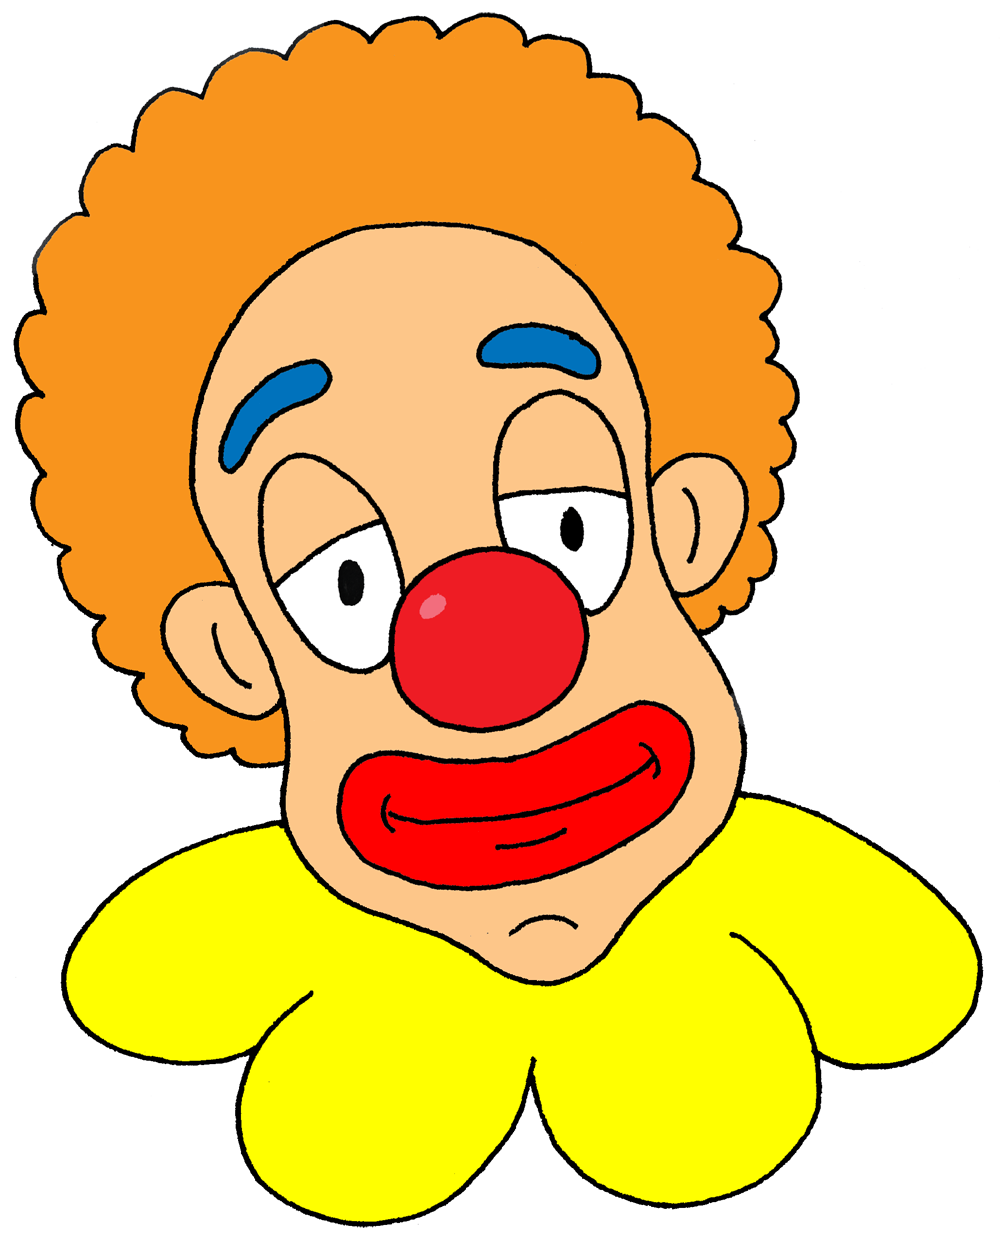 Free Clown Images, Download Free Clown Images png images, Free ClipArts